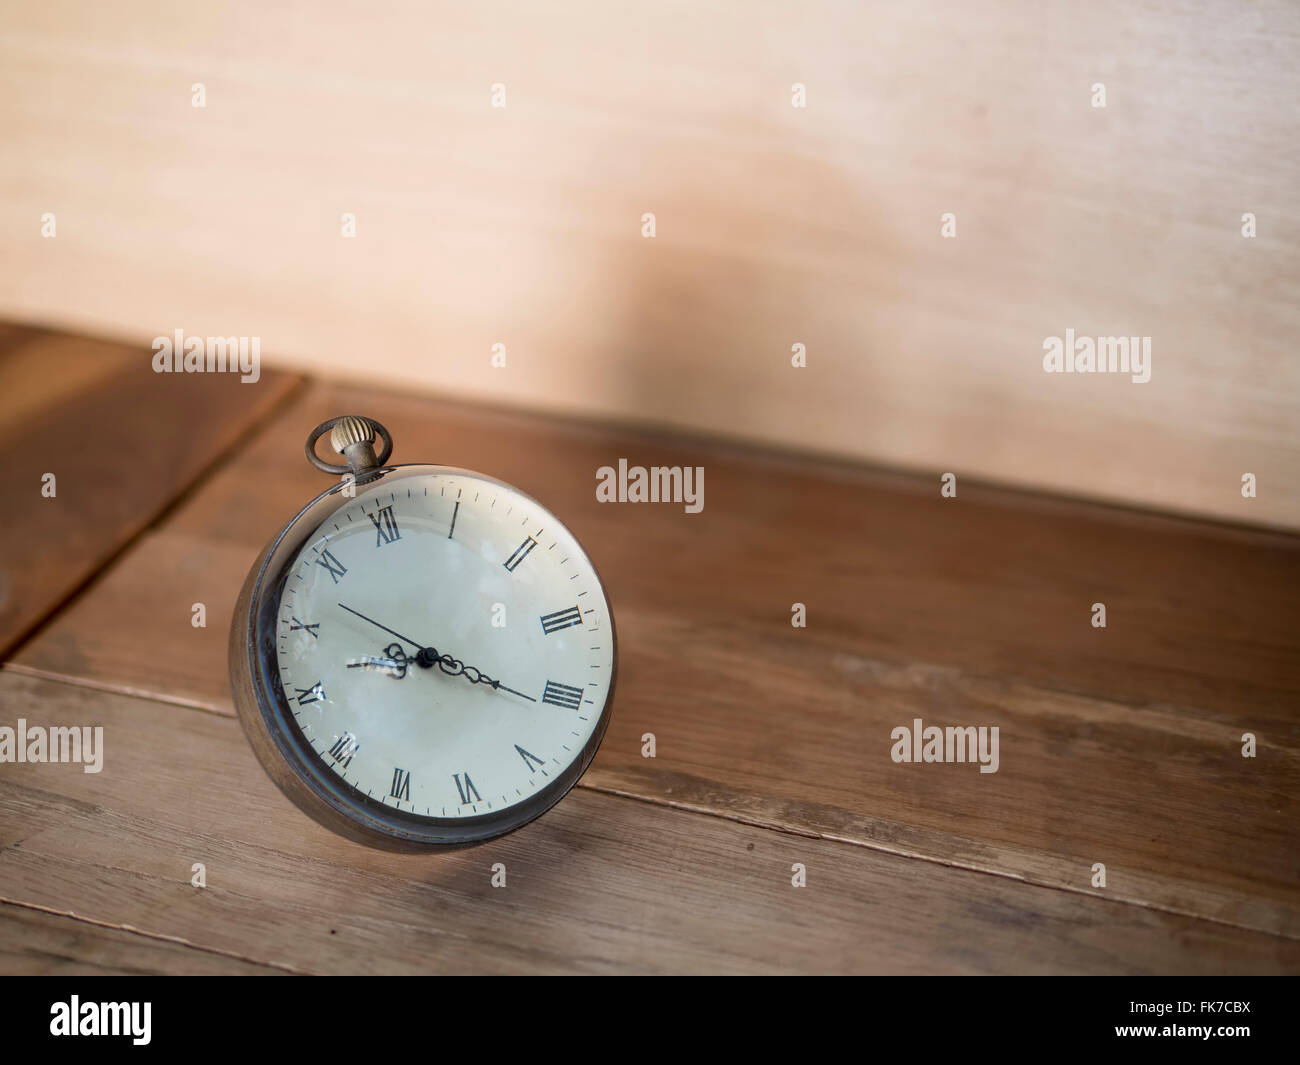 Floating clock on wookd background, conceptual image Stock Photo